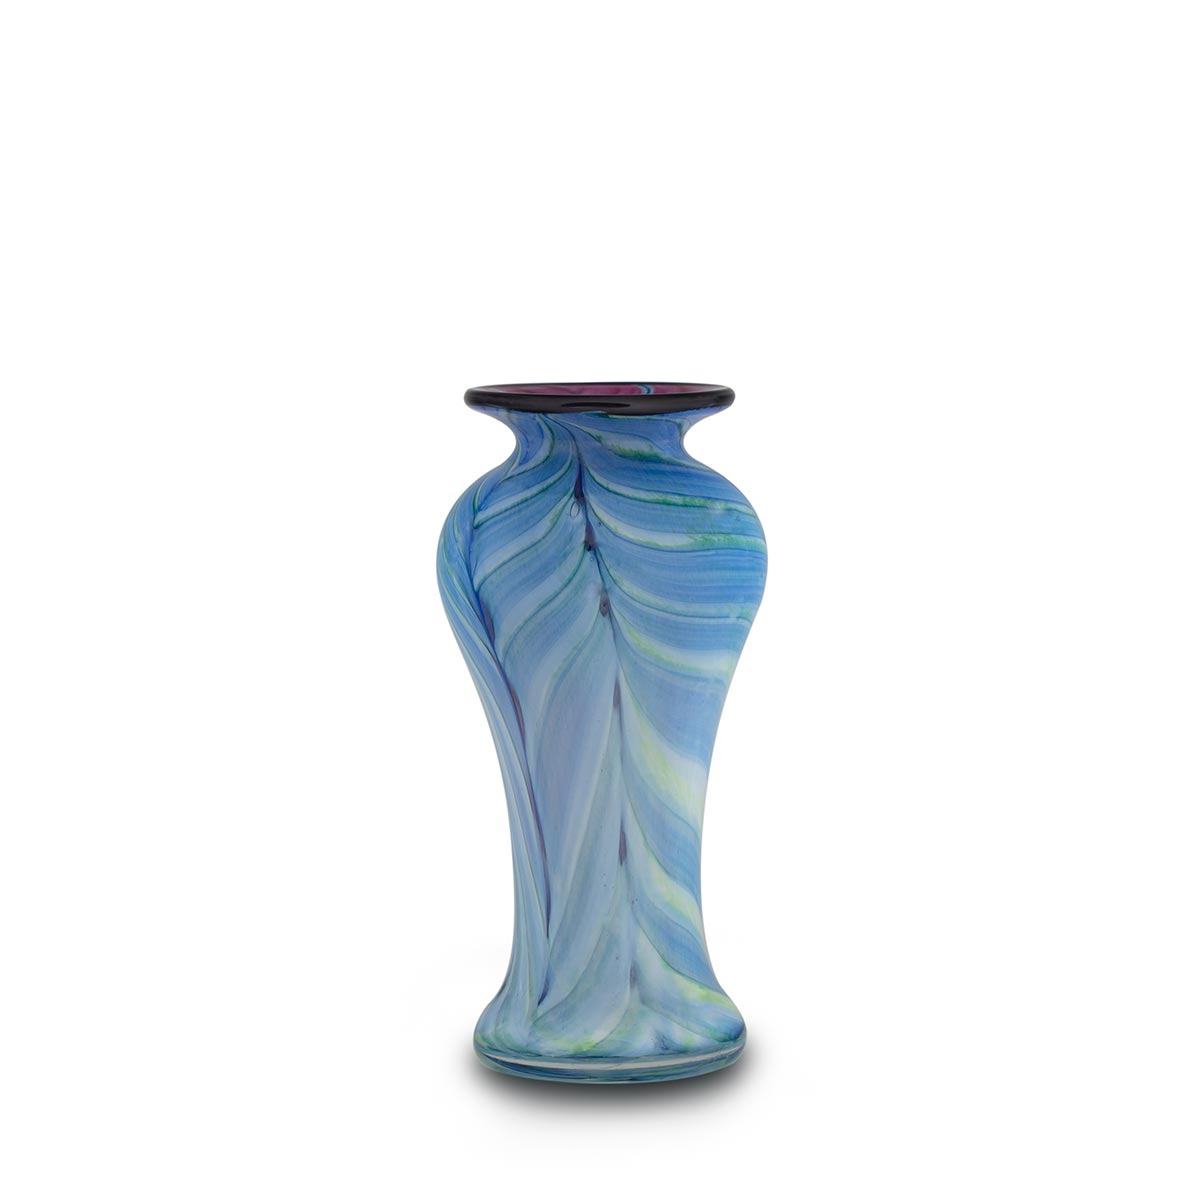 Small Slender Purple-Green Blue Feathered Vase